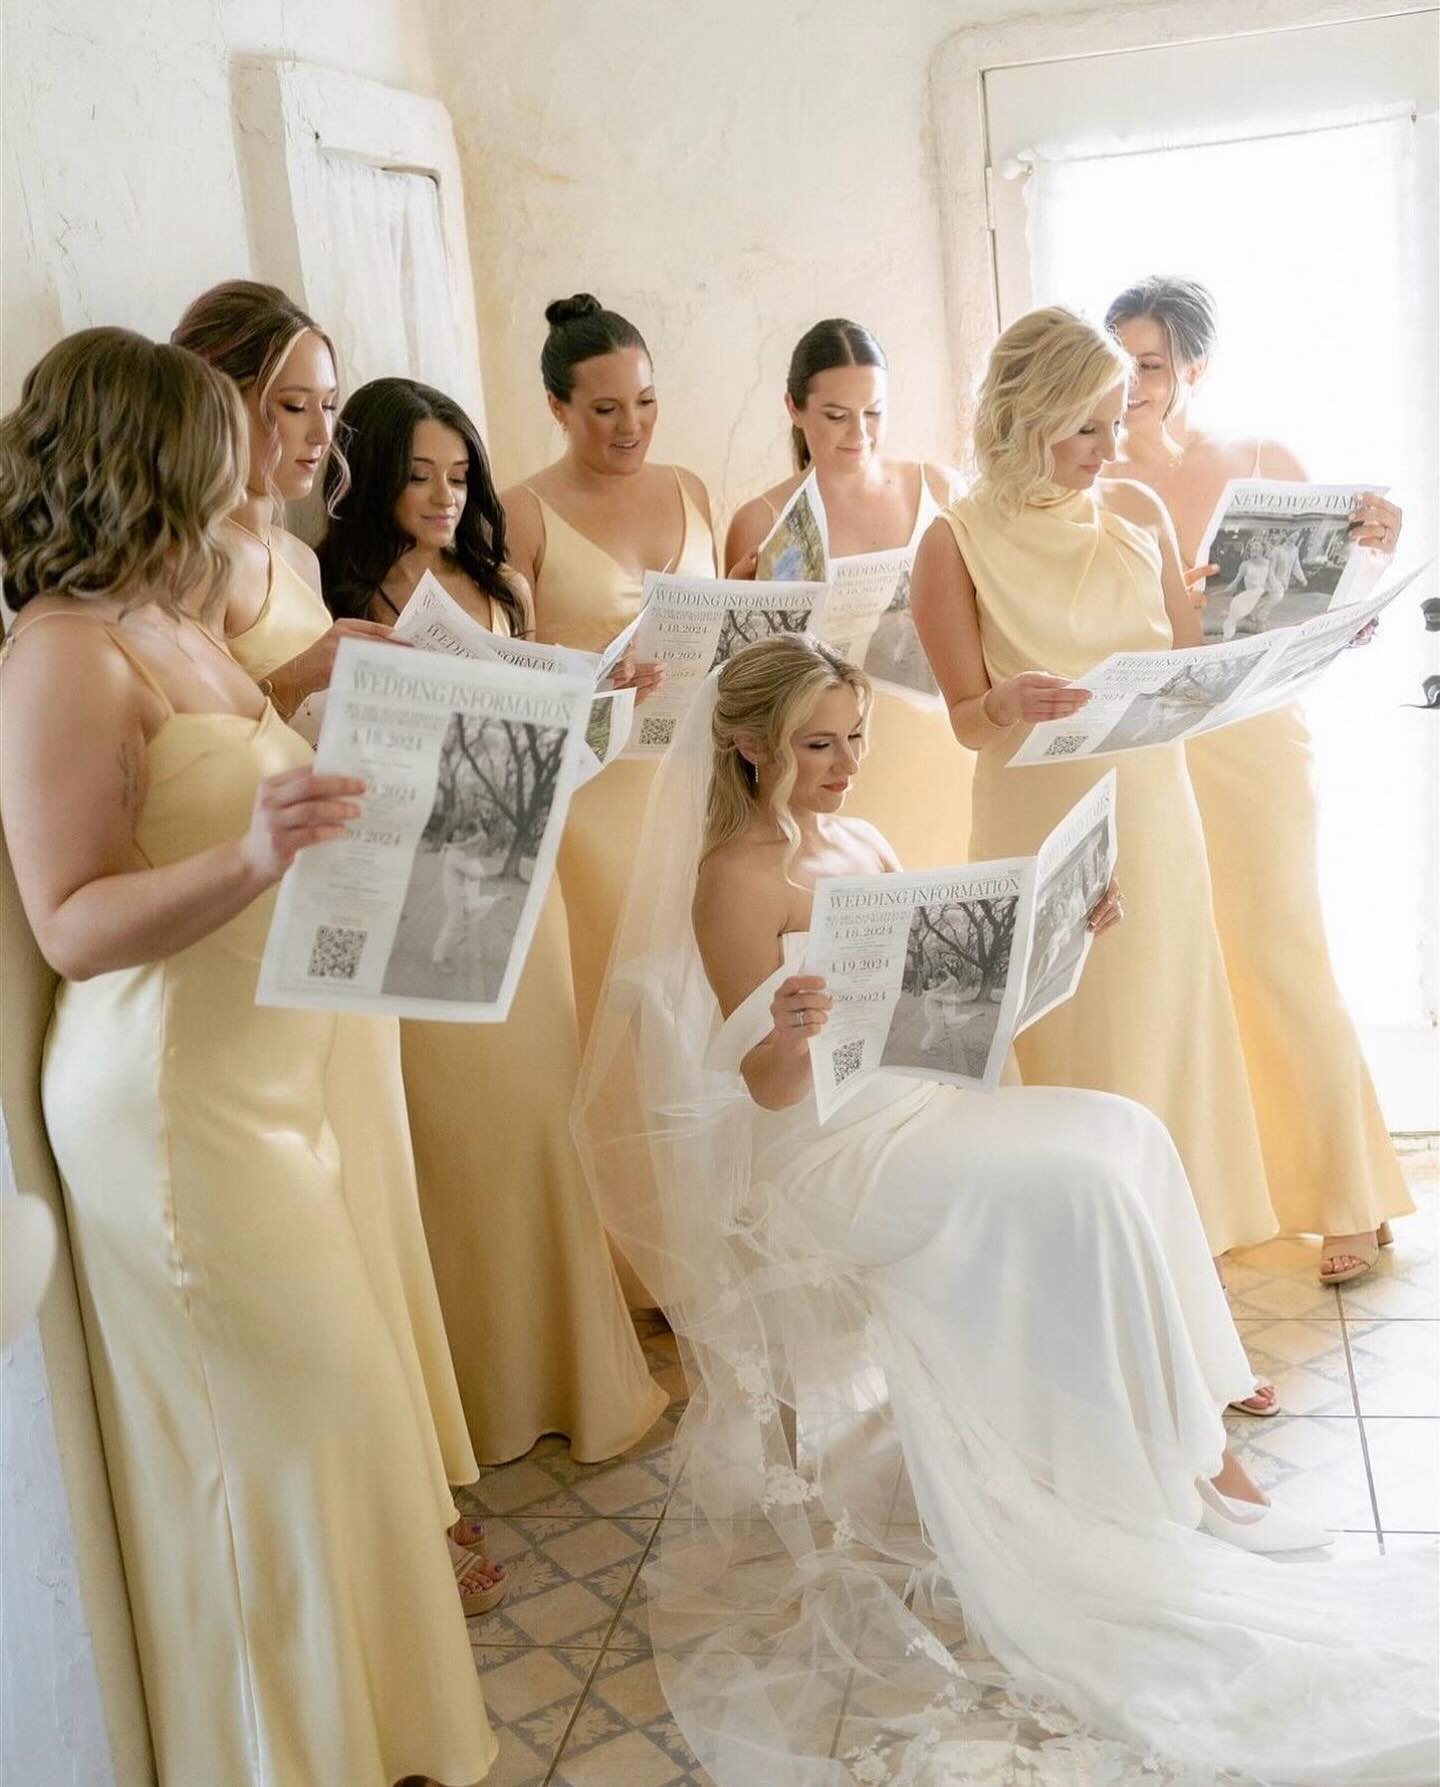 Yellow bridesmaid dresses will forever remind us of Andie Anderson (IYKYK) and we&rsquo;re not mad at it.✨ How stunning did these beauties look?! And how cute are those newspapers?

Photography: @mikeloandlindsey 
Bride: @grimriecher 
Wedding Dress: 